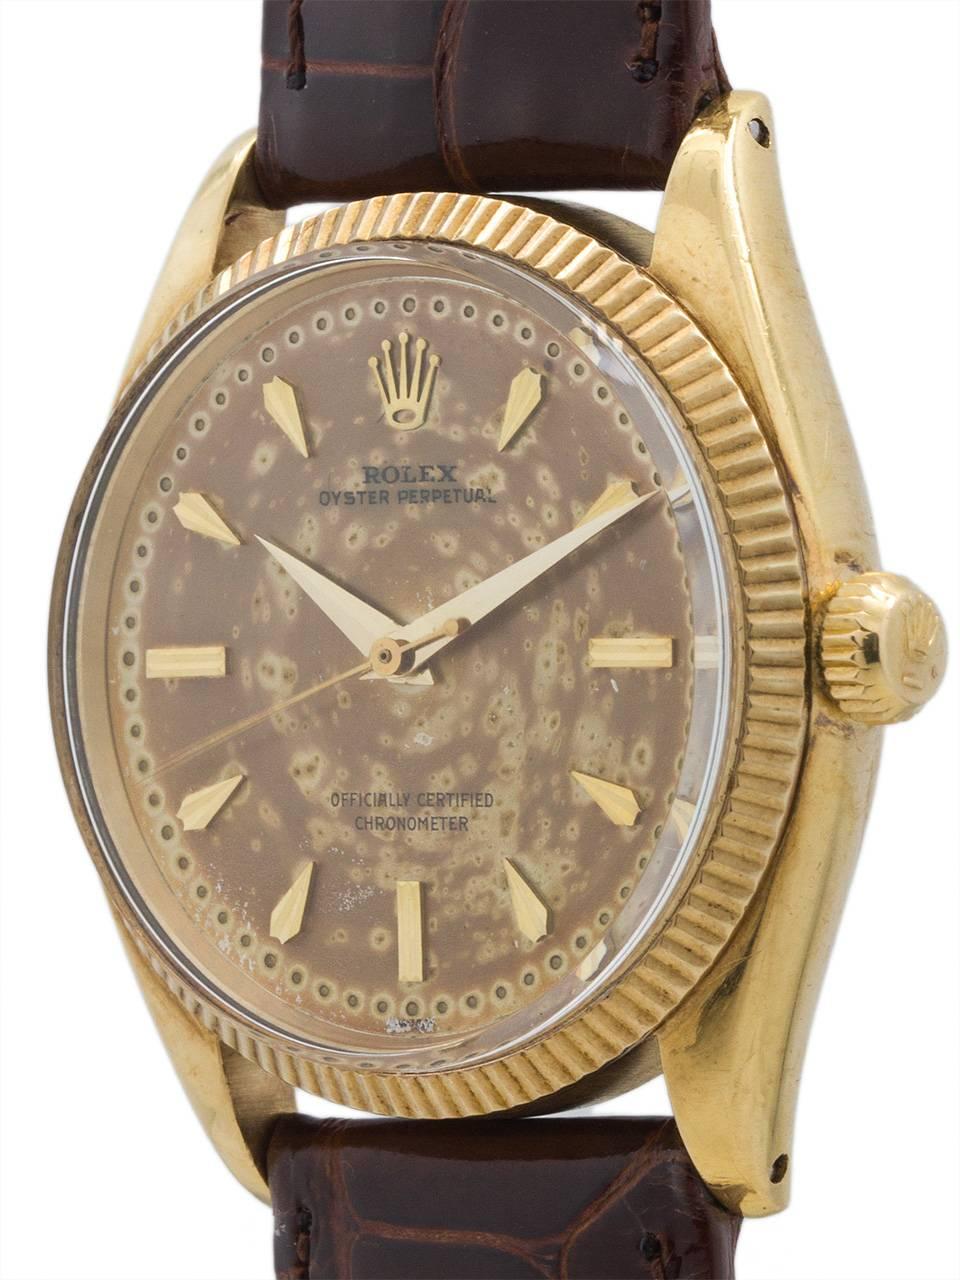 
Rolex 14K yellow gold Oyster Pereptual ref 6569 serial #158,xxx circa 1956. Featuring a 34mm diameter Oyster case with finely milled bezel, acrylic crystal and richly patina’d 2 piece dial with distinctive tapered and faceted applied gold indexes,